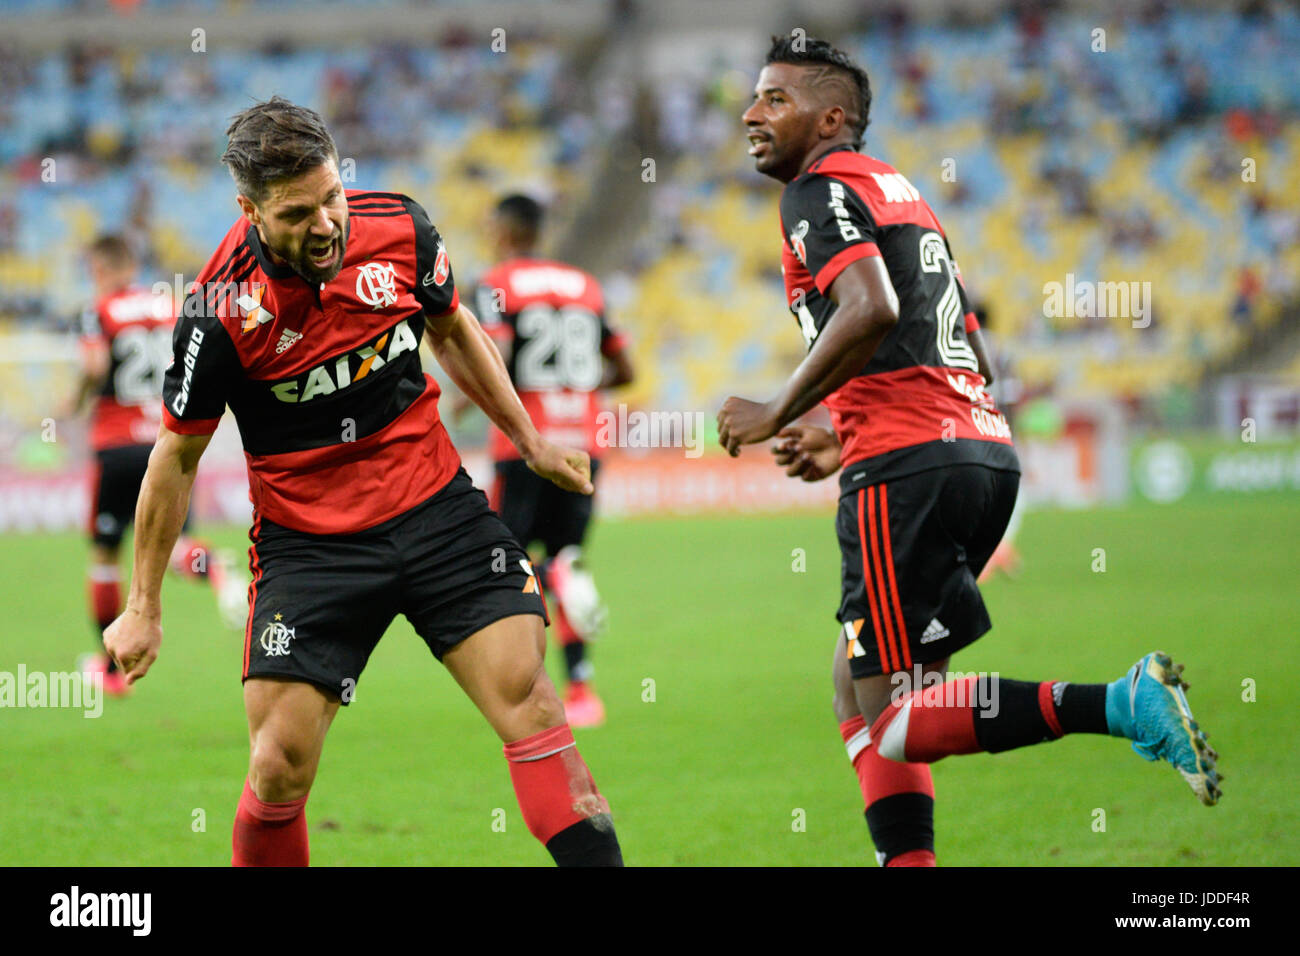 Diego, Flamengo player celebrates goal during match against Fluminense in a game valid for the eighth round of the Brazilian Campenato at the Maracanã stadium in Rio de Janeiro, on Sunday, 18. (PHOTO: CLEVER FELIX/BRAZIL PHOTO PRESS) Stock Photo